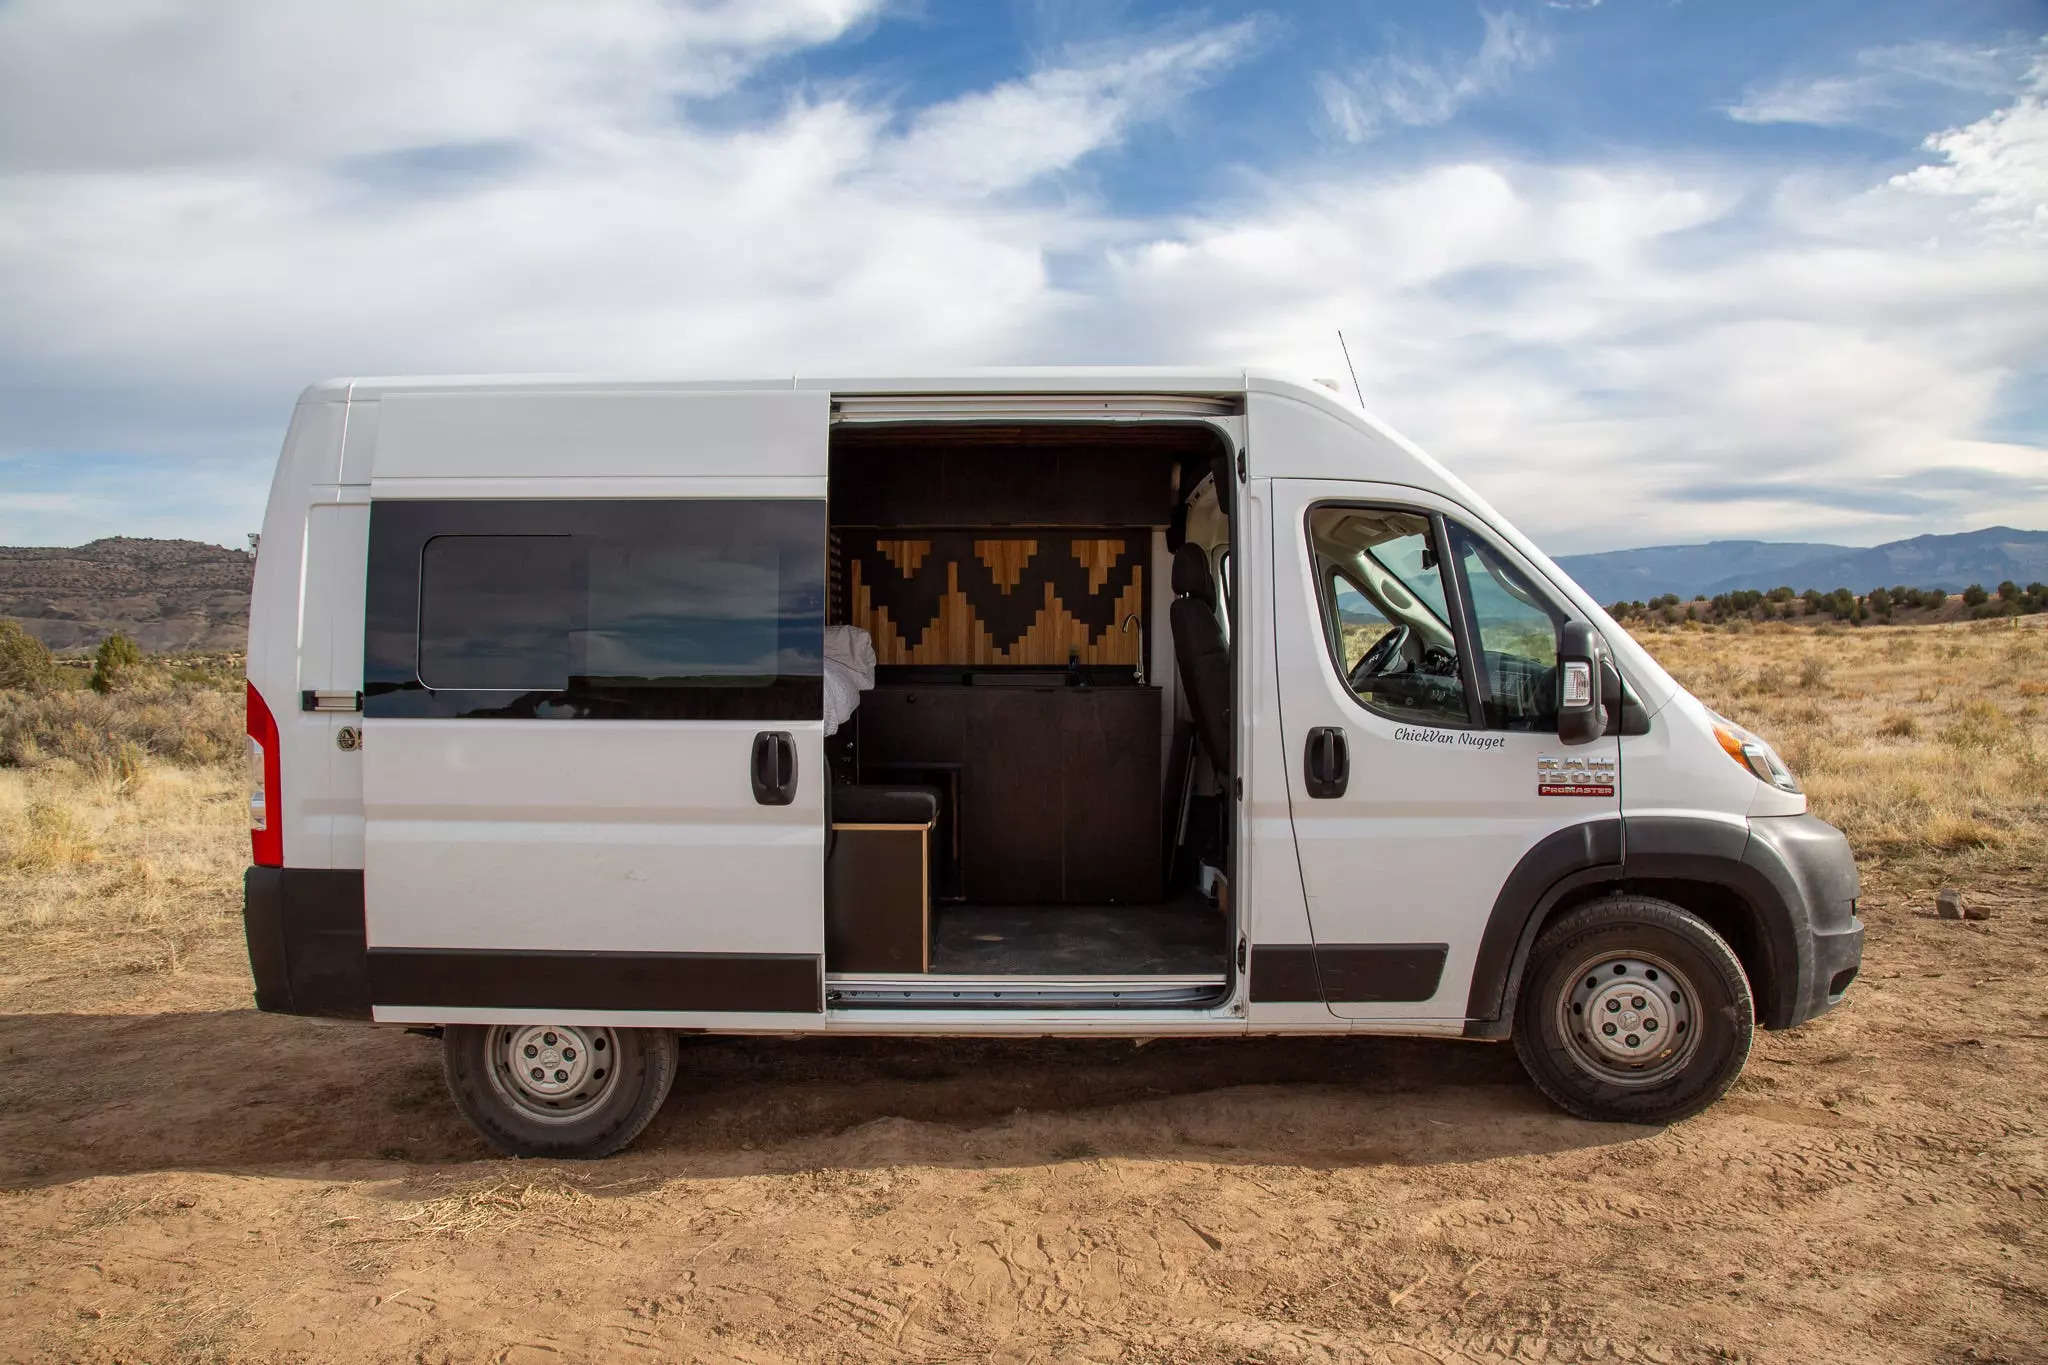 The Ram ProMaster the author rented from Native Campervans.